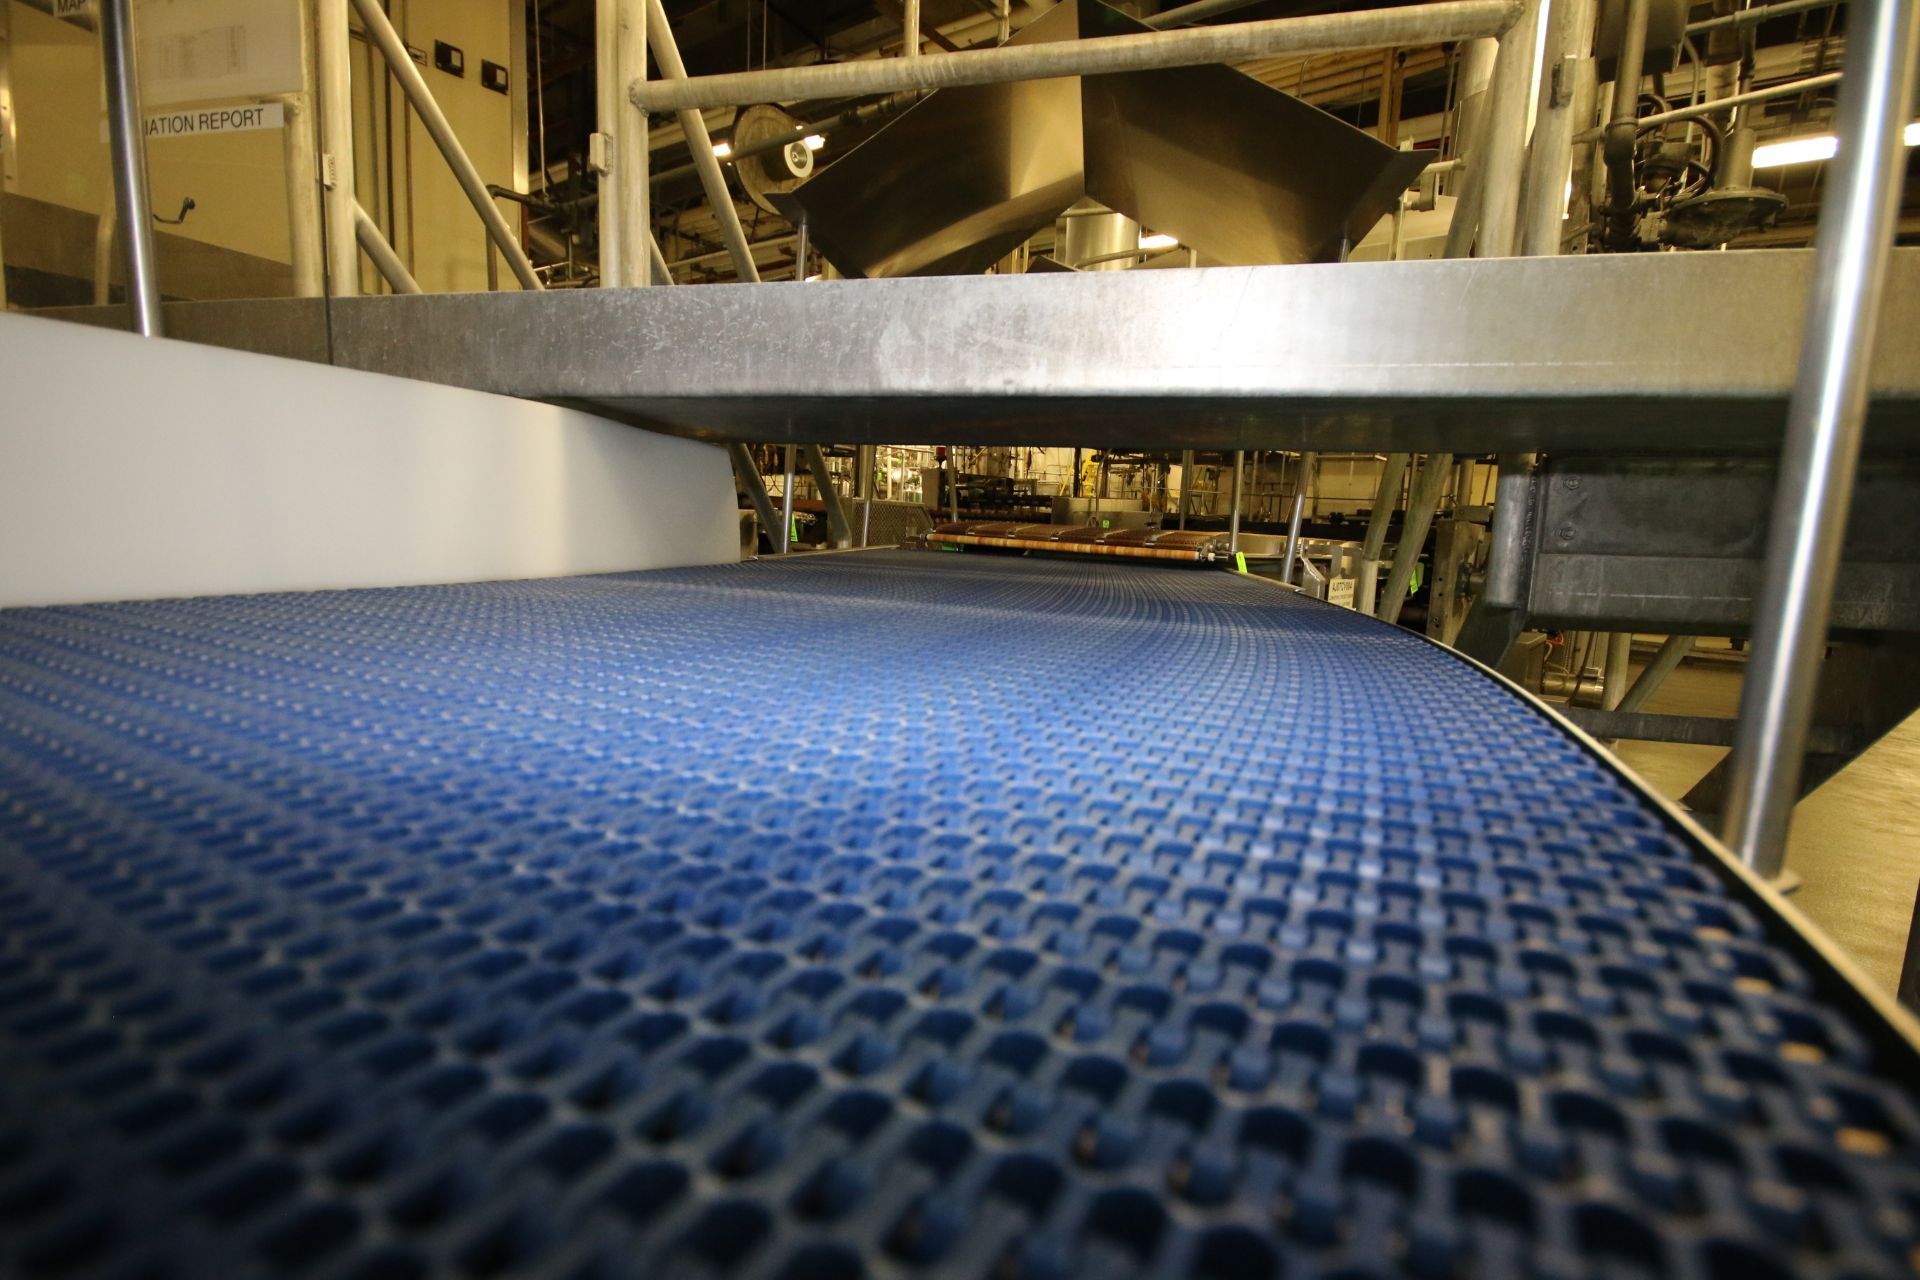 ~17 ft. L S/S Discharge Conveyor with 32" W Intralox Belt, Incline, (2) Cryo-Jet Cooler Freezer - Image 3 of 3